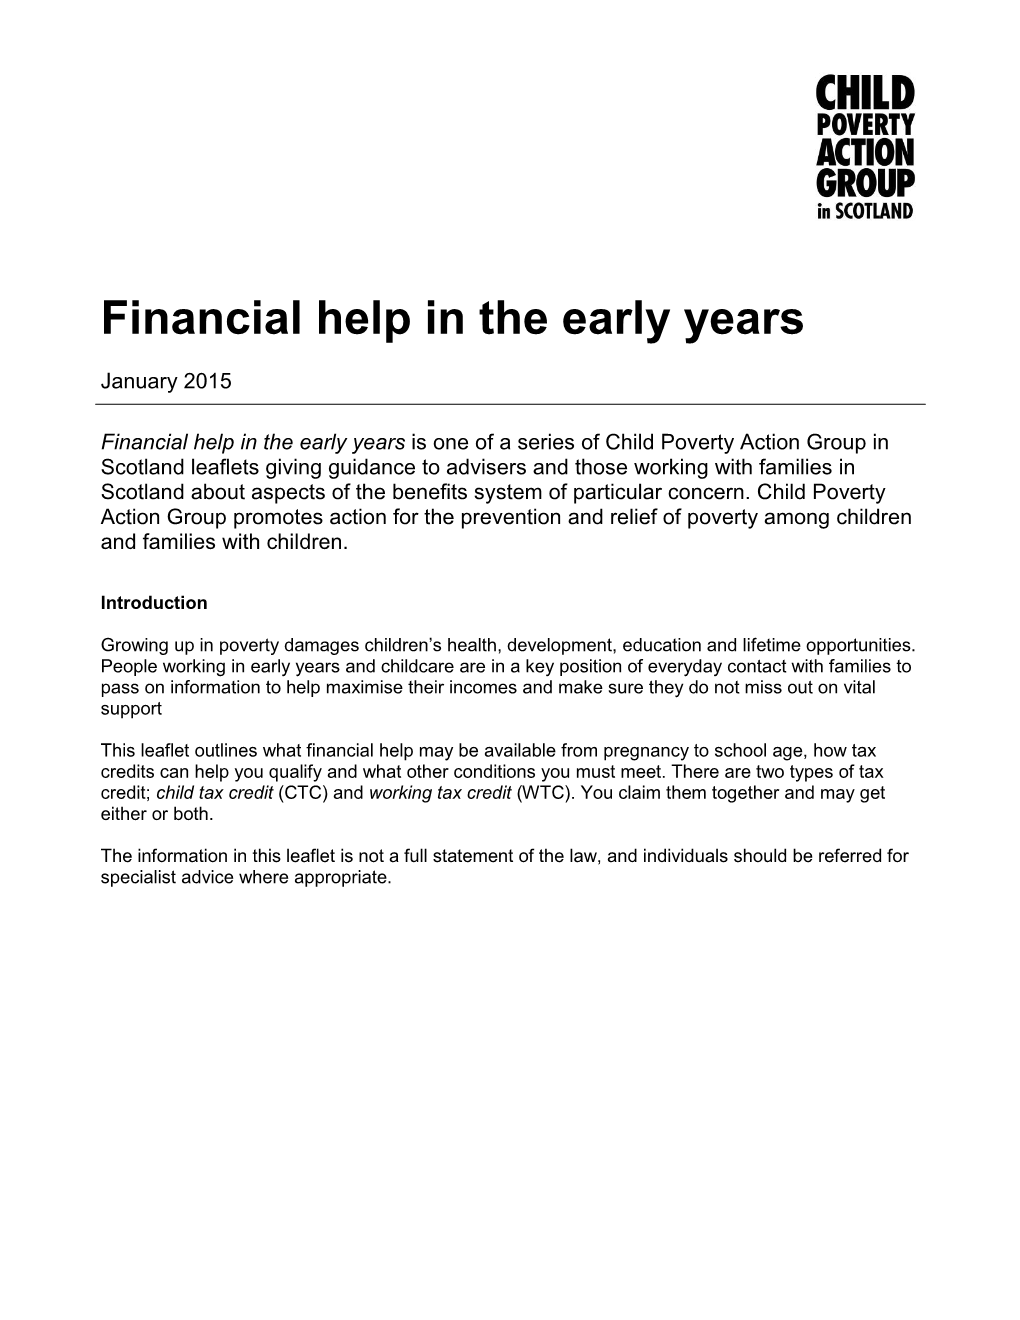 Financial Help in the Early Years